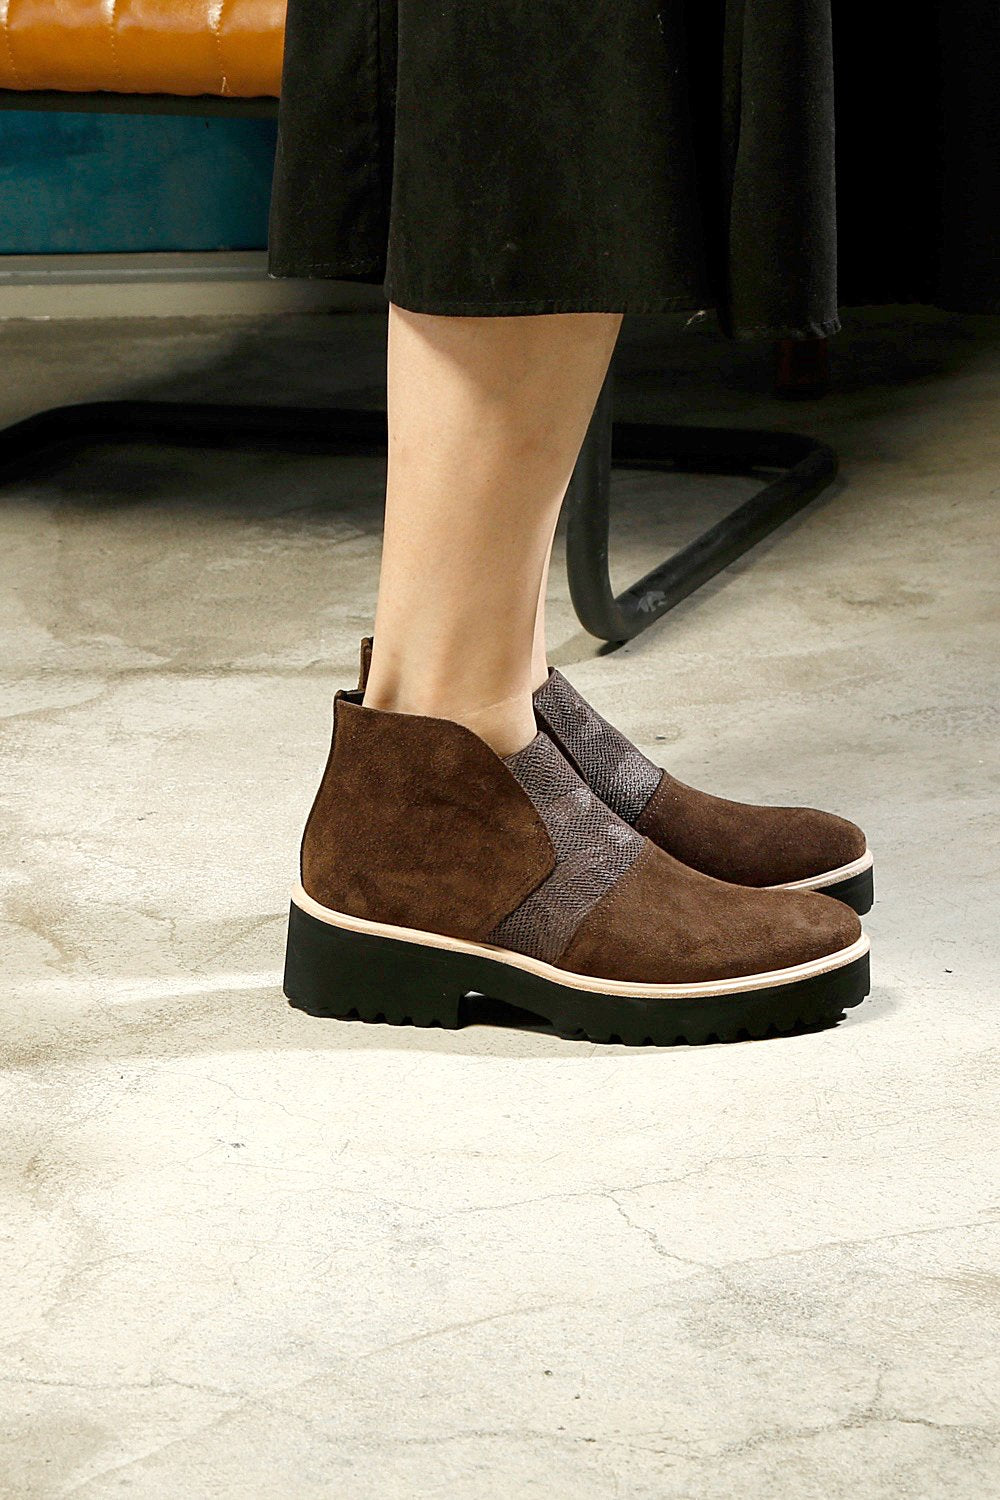 Outer view of a woman wearing a pair of the all black nu banded bootie in brown. This ankle length bootie has a suede upper with an elastic camouflage inlet. The lugg sole is black with white piping.